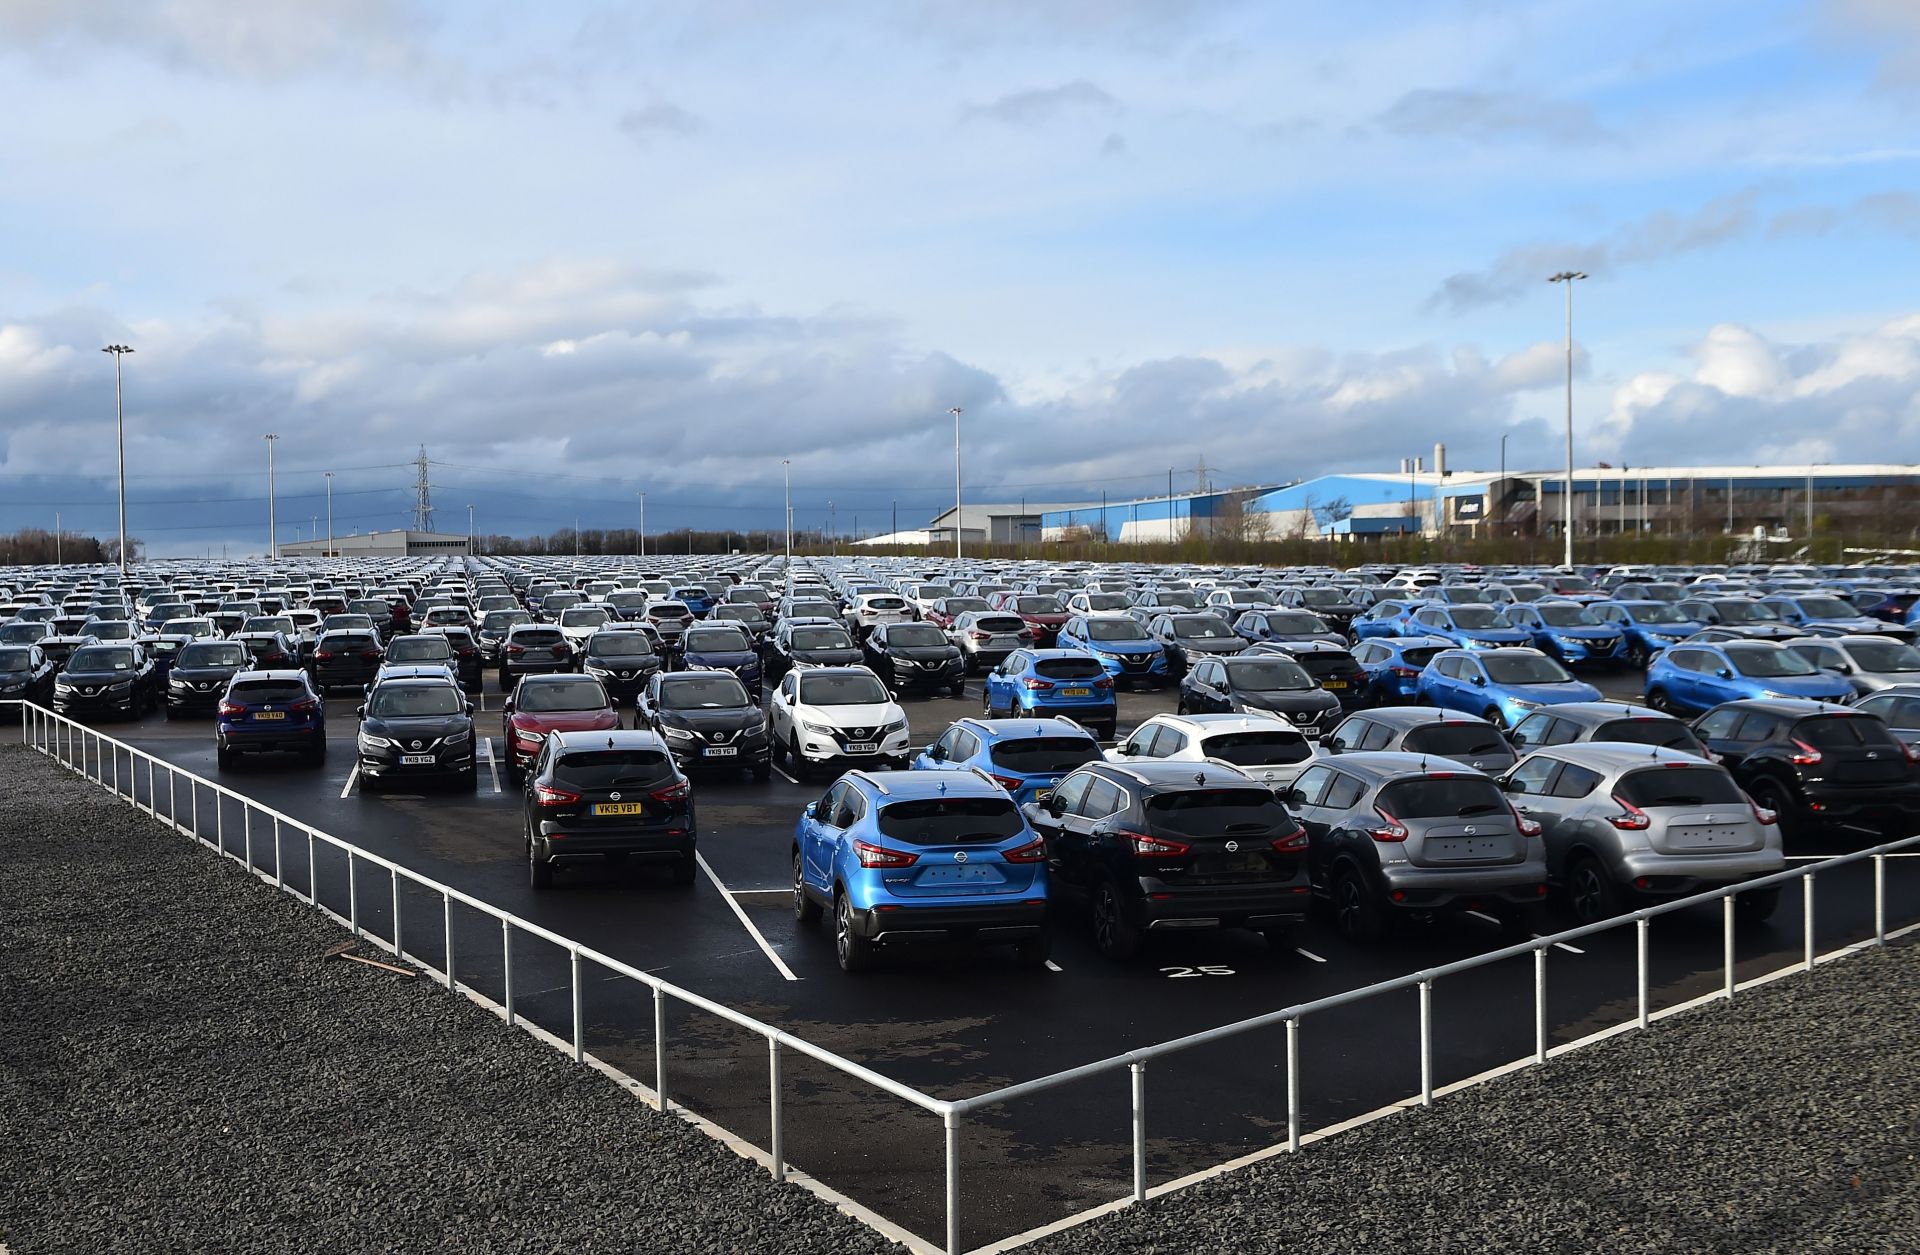 Nissan cars are pictured, parked in a lot at its' Sunderland plant in north east England on March 16, 2019. 